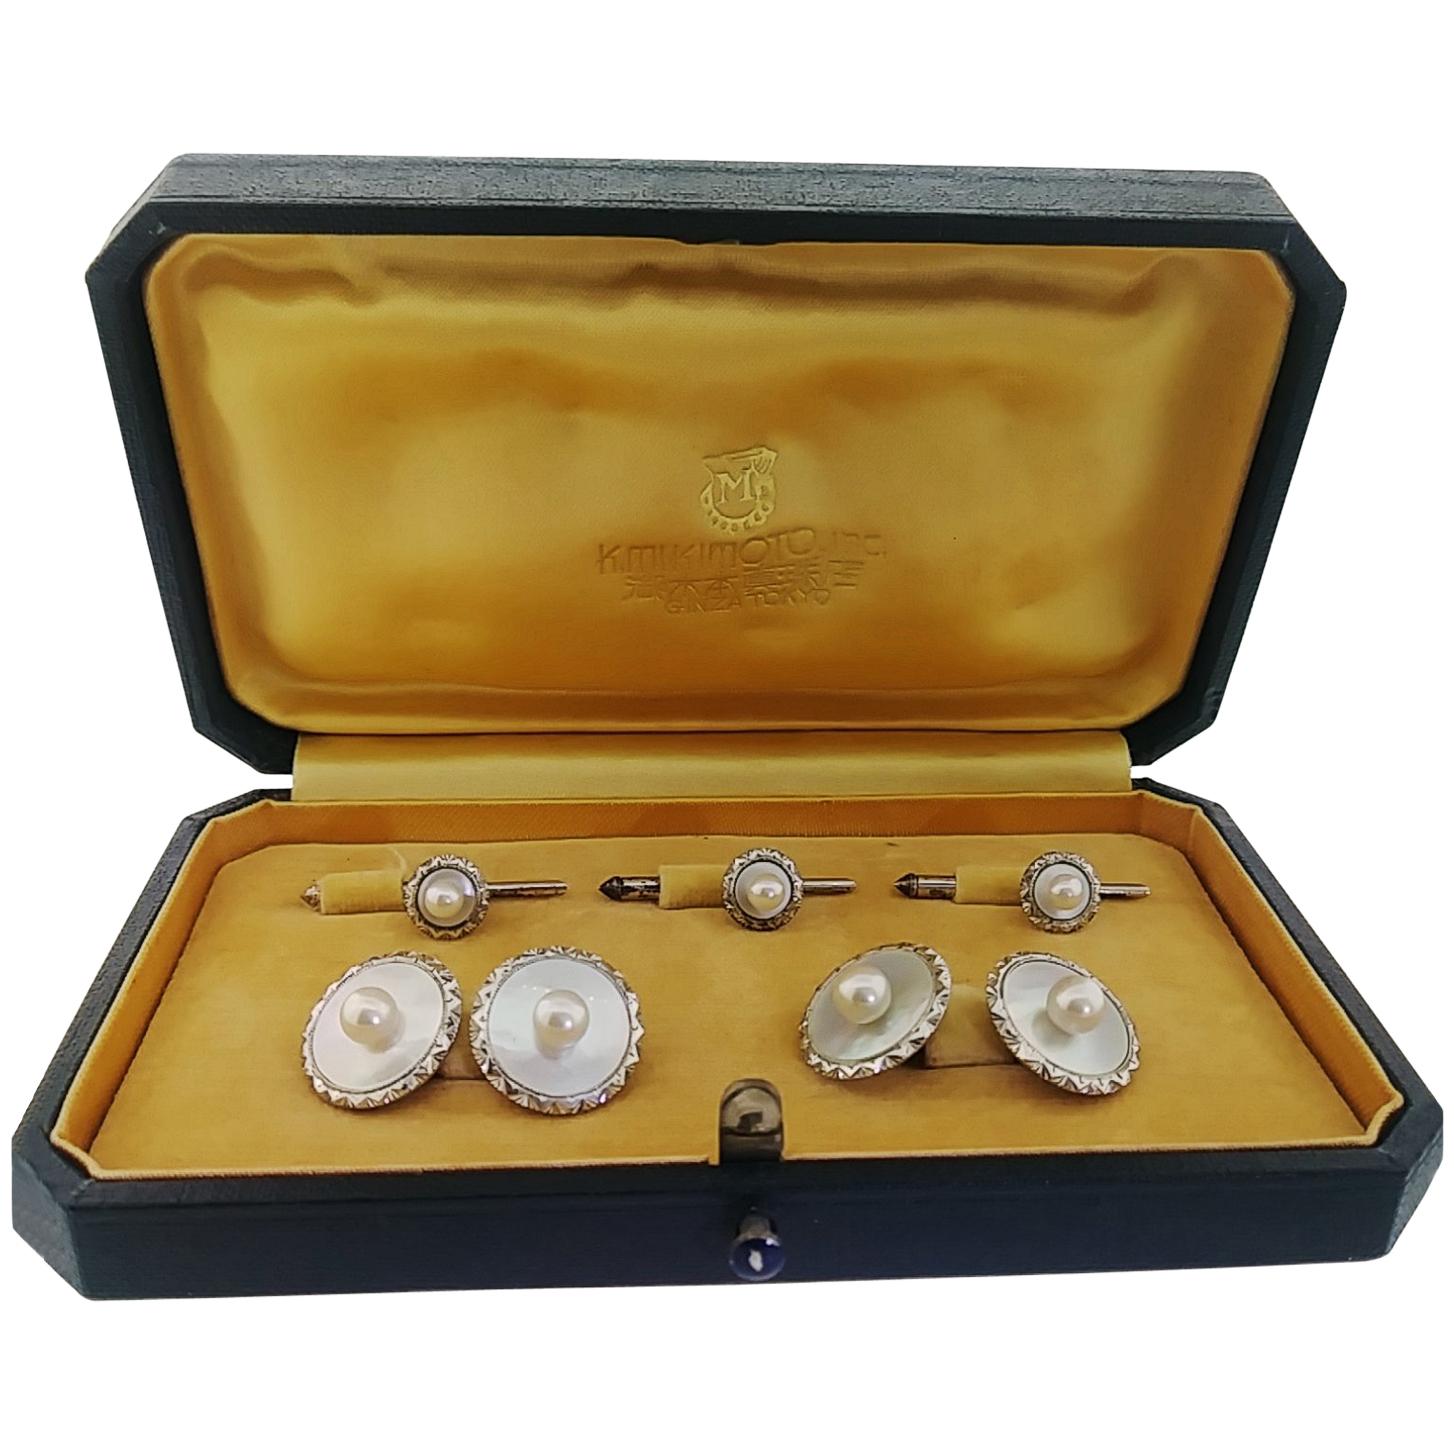 Mikimoto Art Deco Silver Mother-of-Pearl Cufflinks and Shirt Stud Set